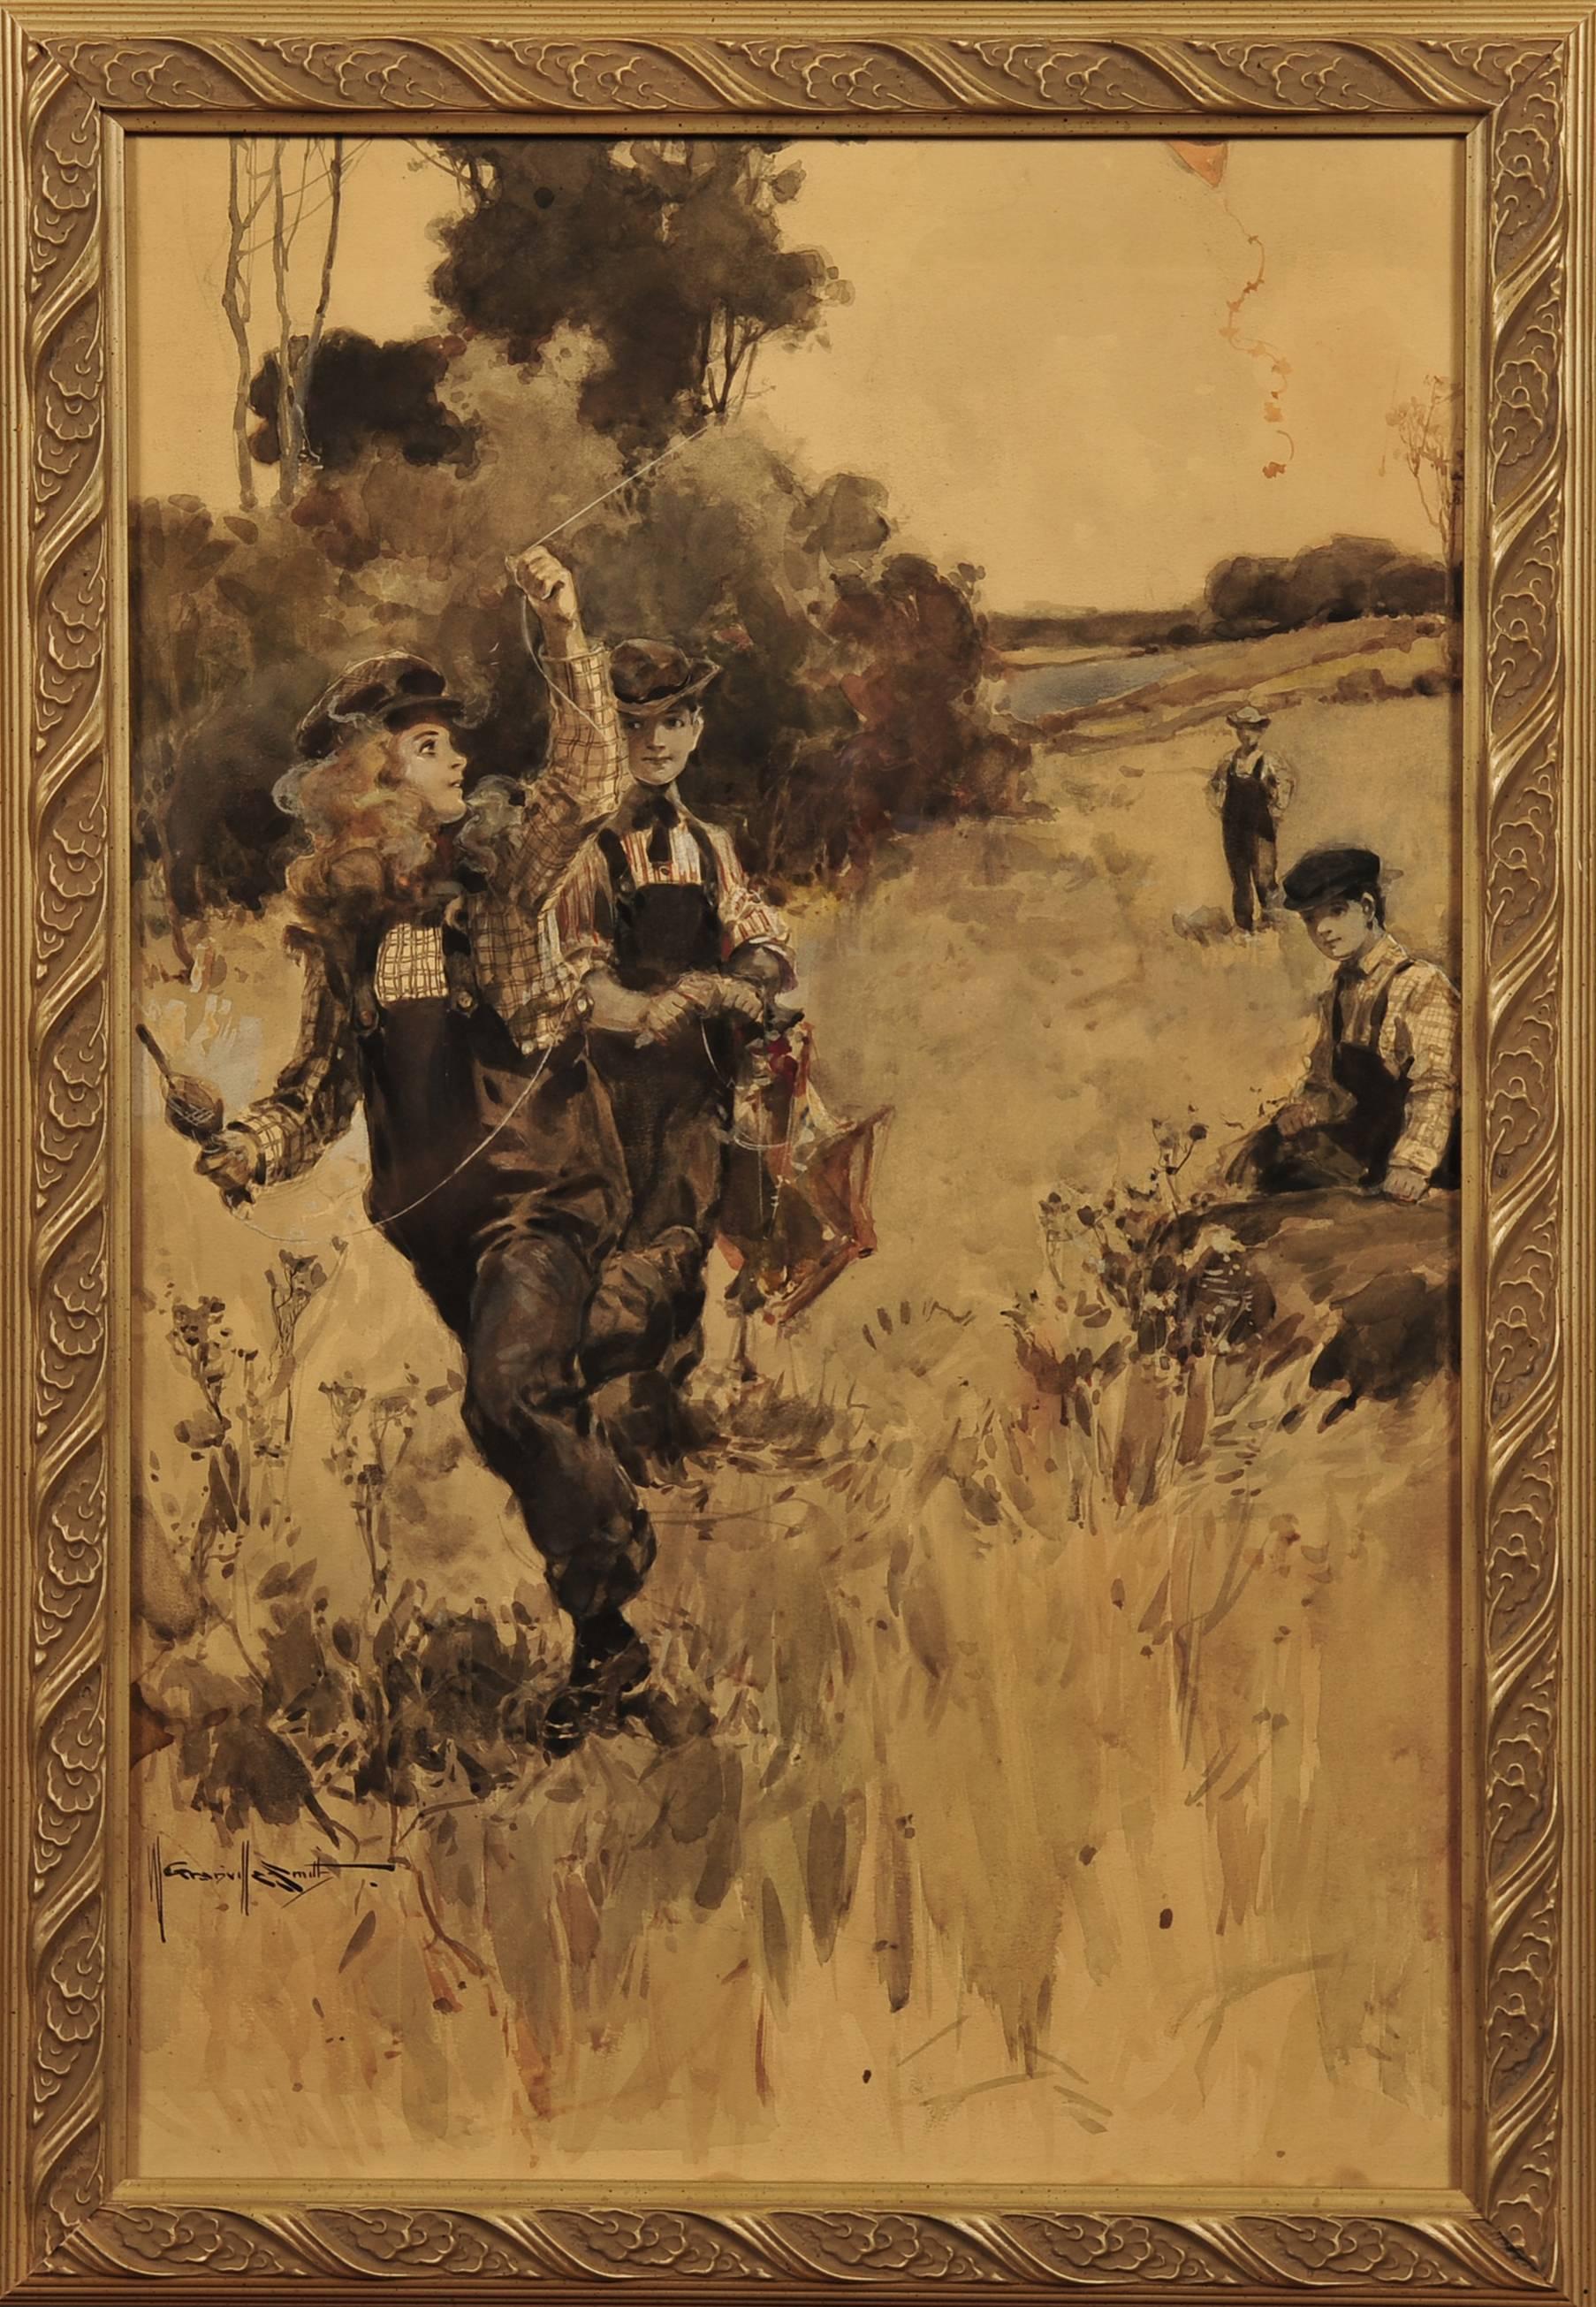 Playing in the Field - Art by Walter Granville-Smith